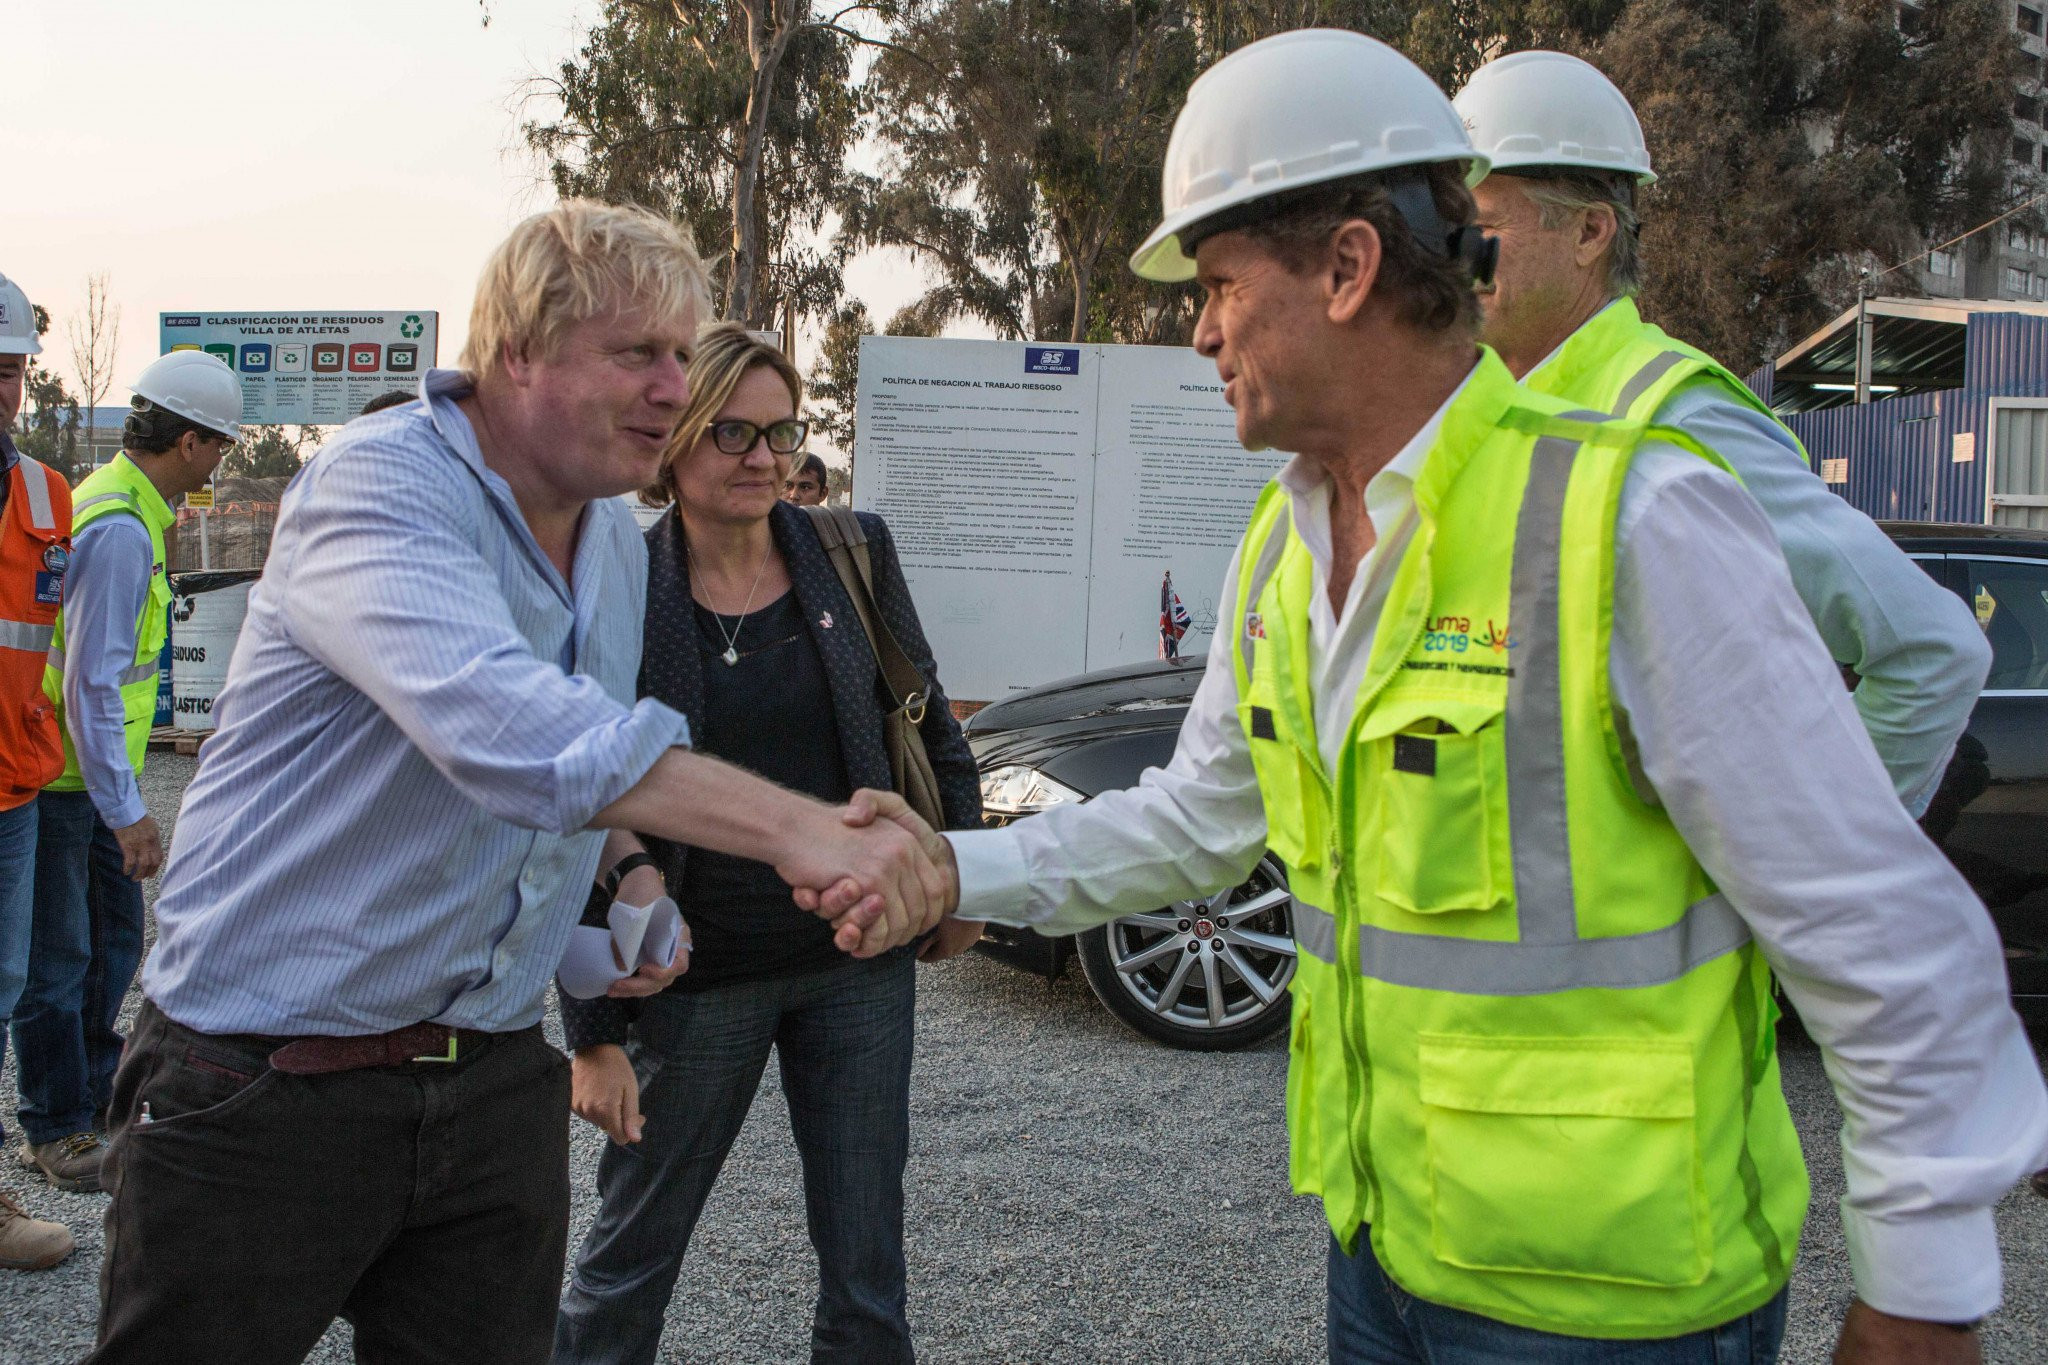 British politicians such as Prime Minister Boris Johnson, then Foreign Secretary, visited Peru in the build up to the 2019 Pan American Games  in Lima where the UK helped with infrastructure projects ©Getty Images